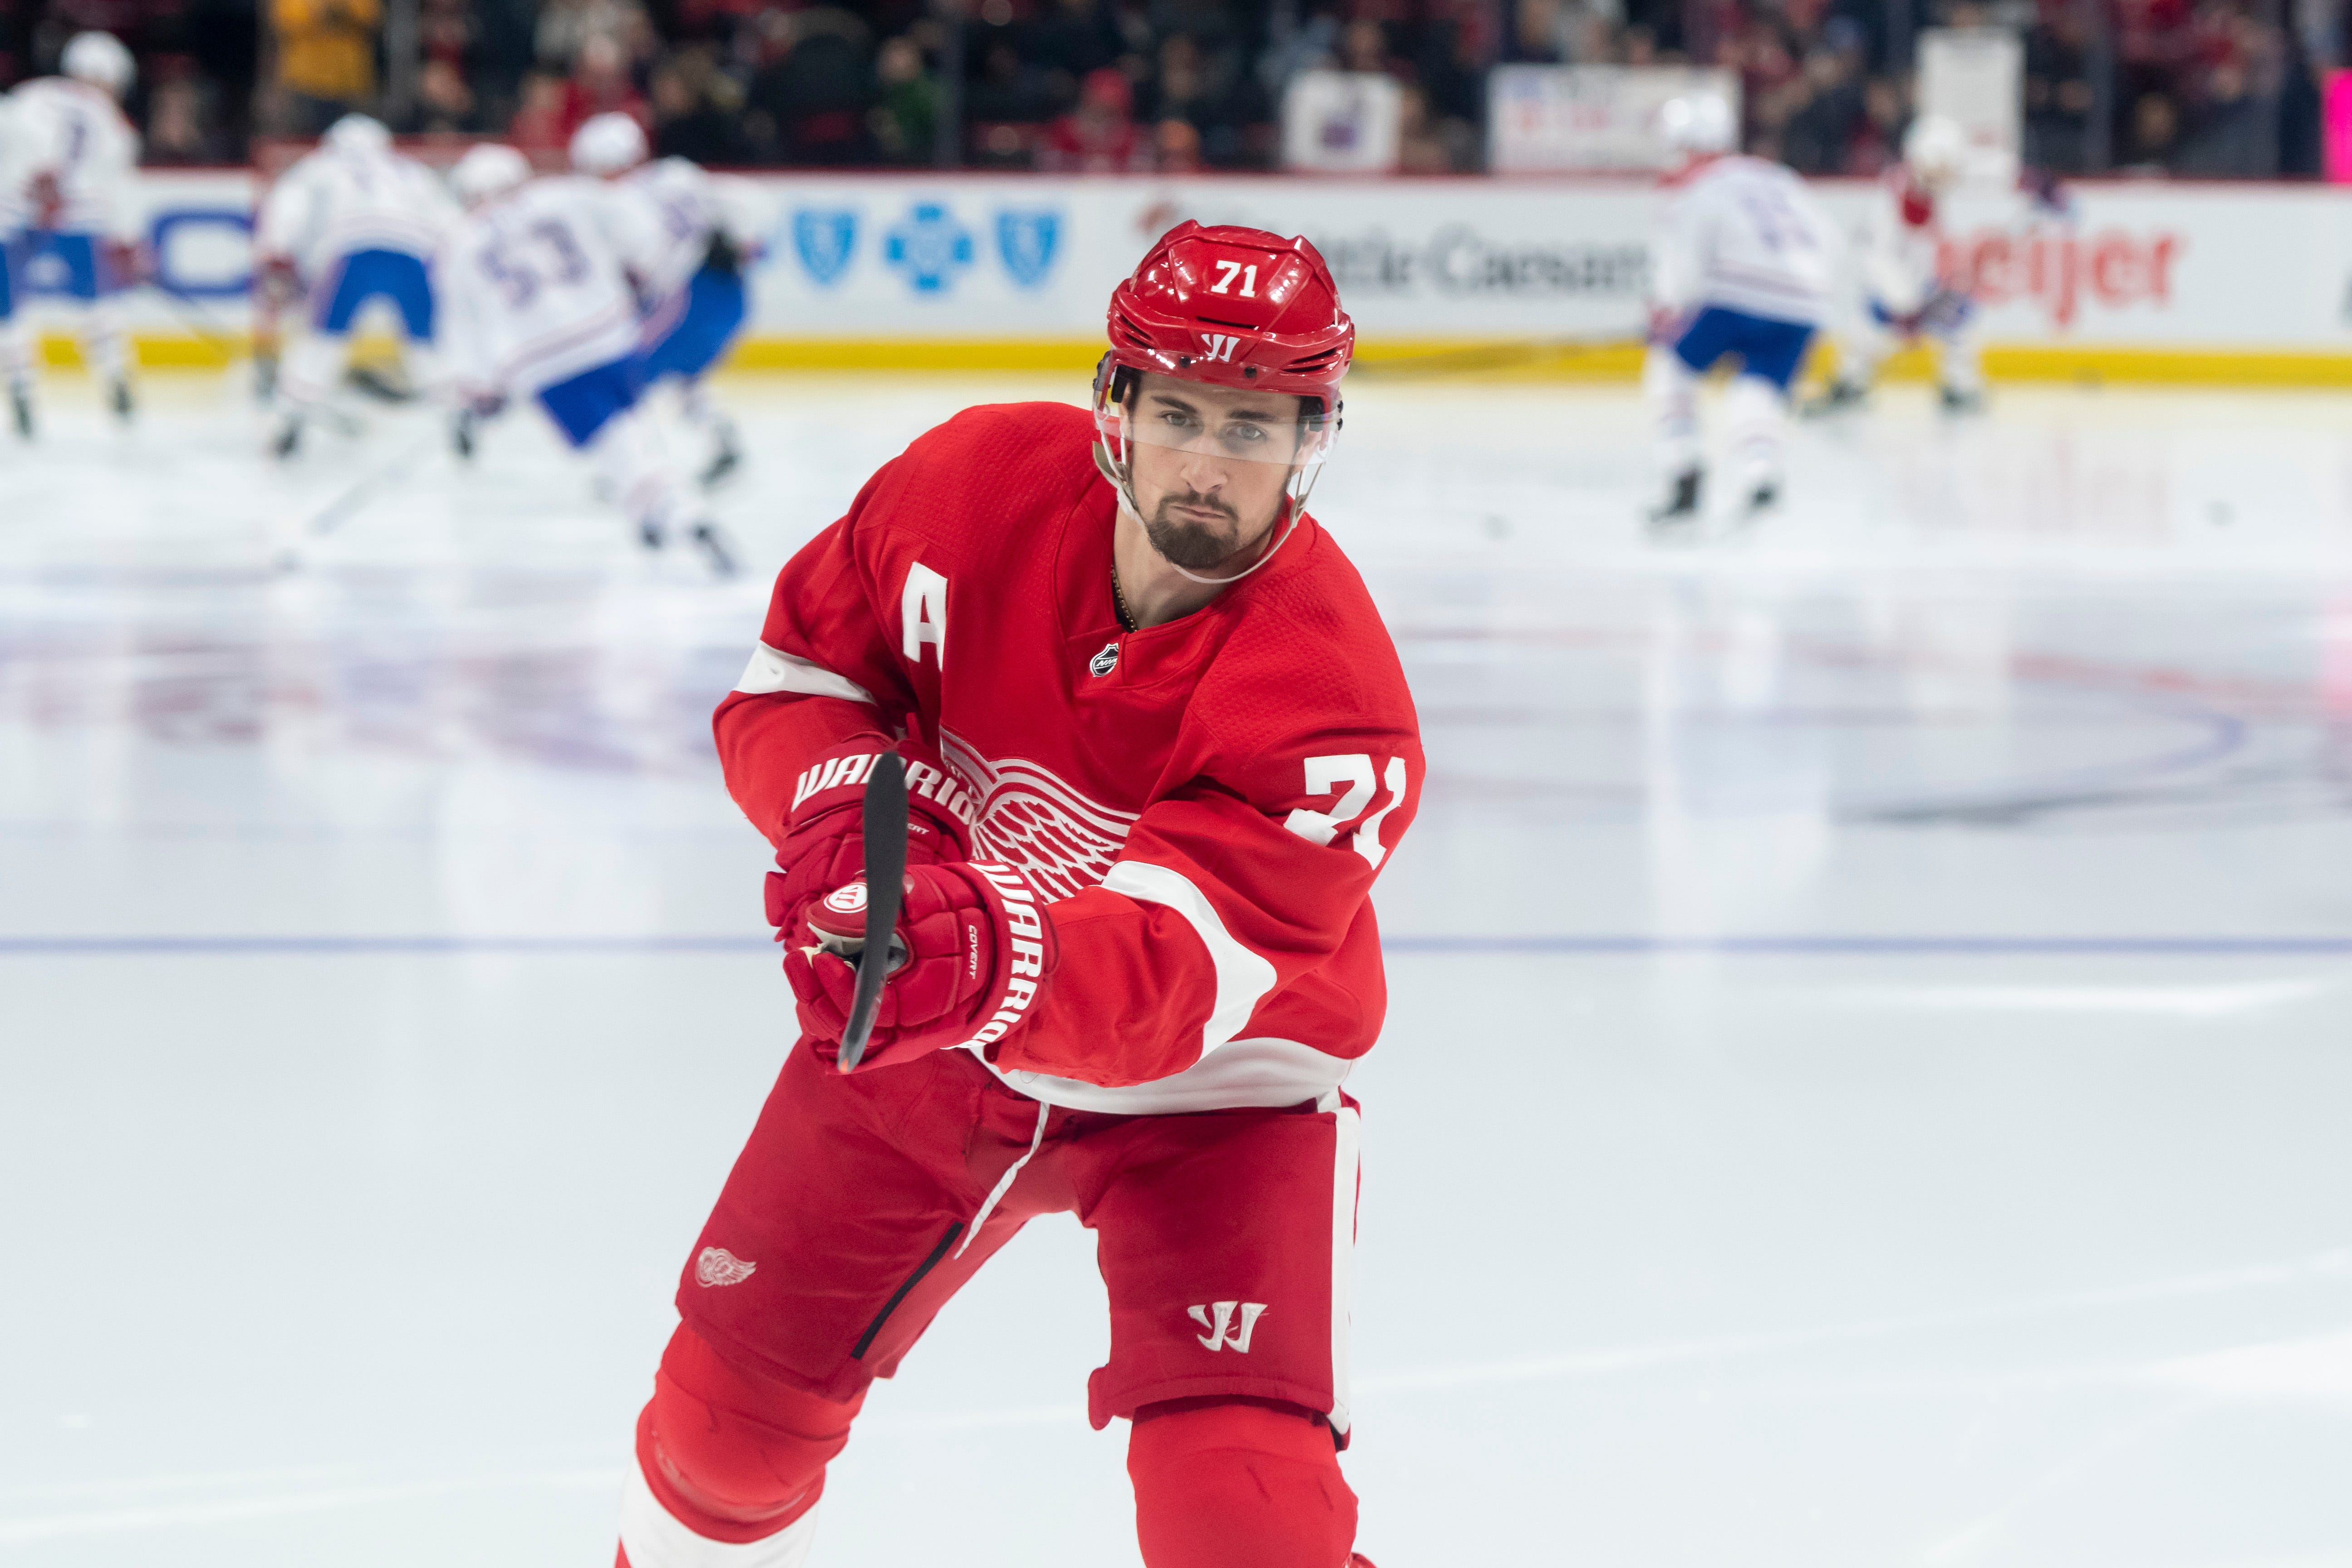 1. Dylan Larkin, center. If there were any doubts about Larkin’s future, they were demolished over a season in which he posted 32 goals, 73 points, and gradually evolved into the team leader. He’ll likely be named captain before next season begins – the right decision. There’s little doubt he’s the most important player in the organization on a variety of levels.